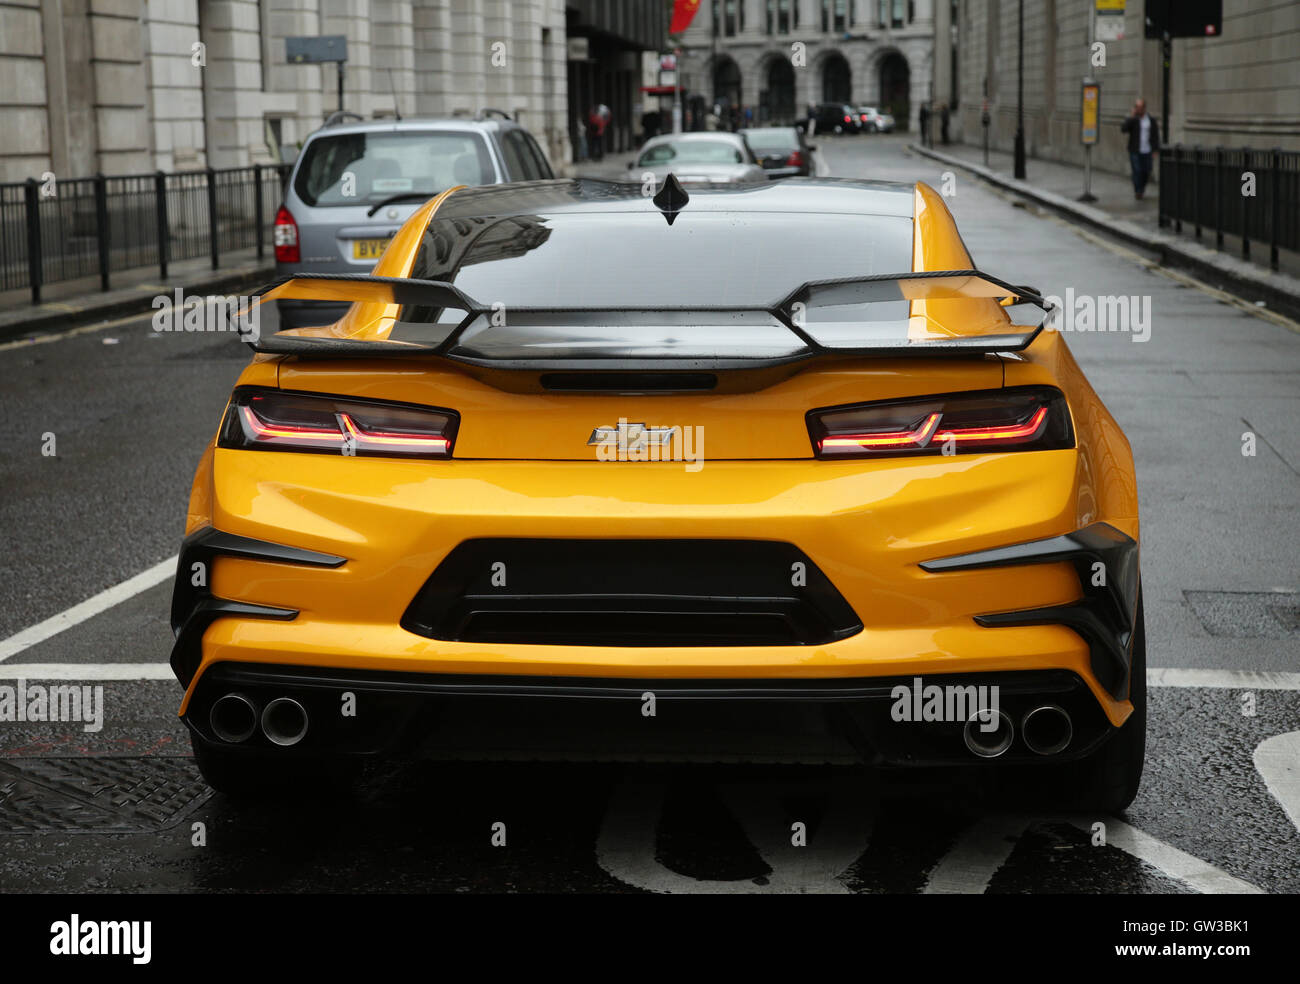 A Chevrolet Camaro sports car during filming of the film Transformers: The Last  Knight, in the City of London Stock Photo - Alamy